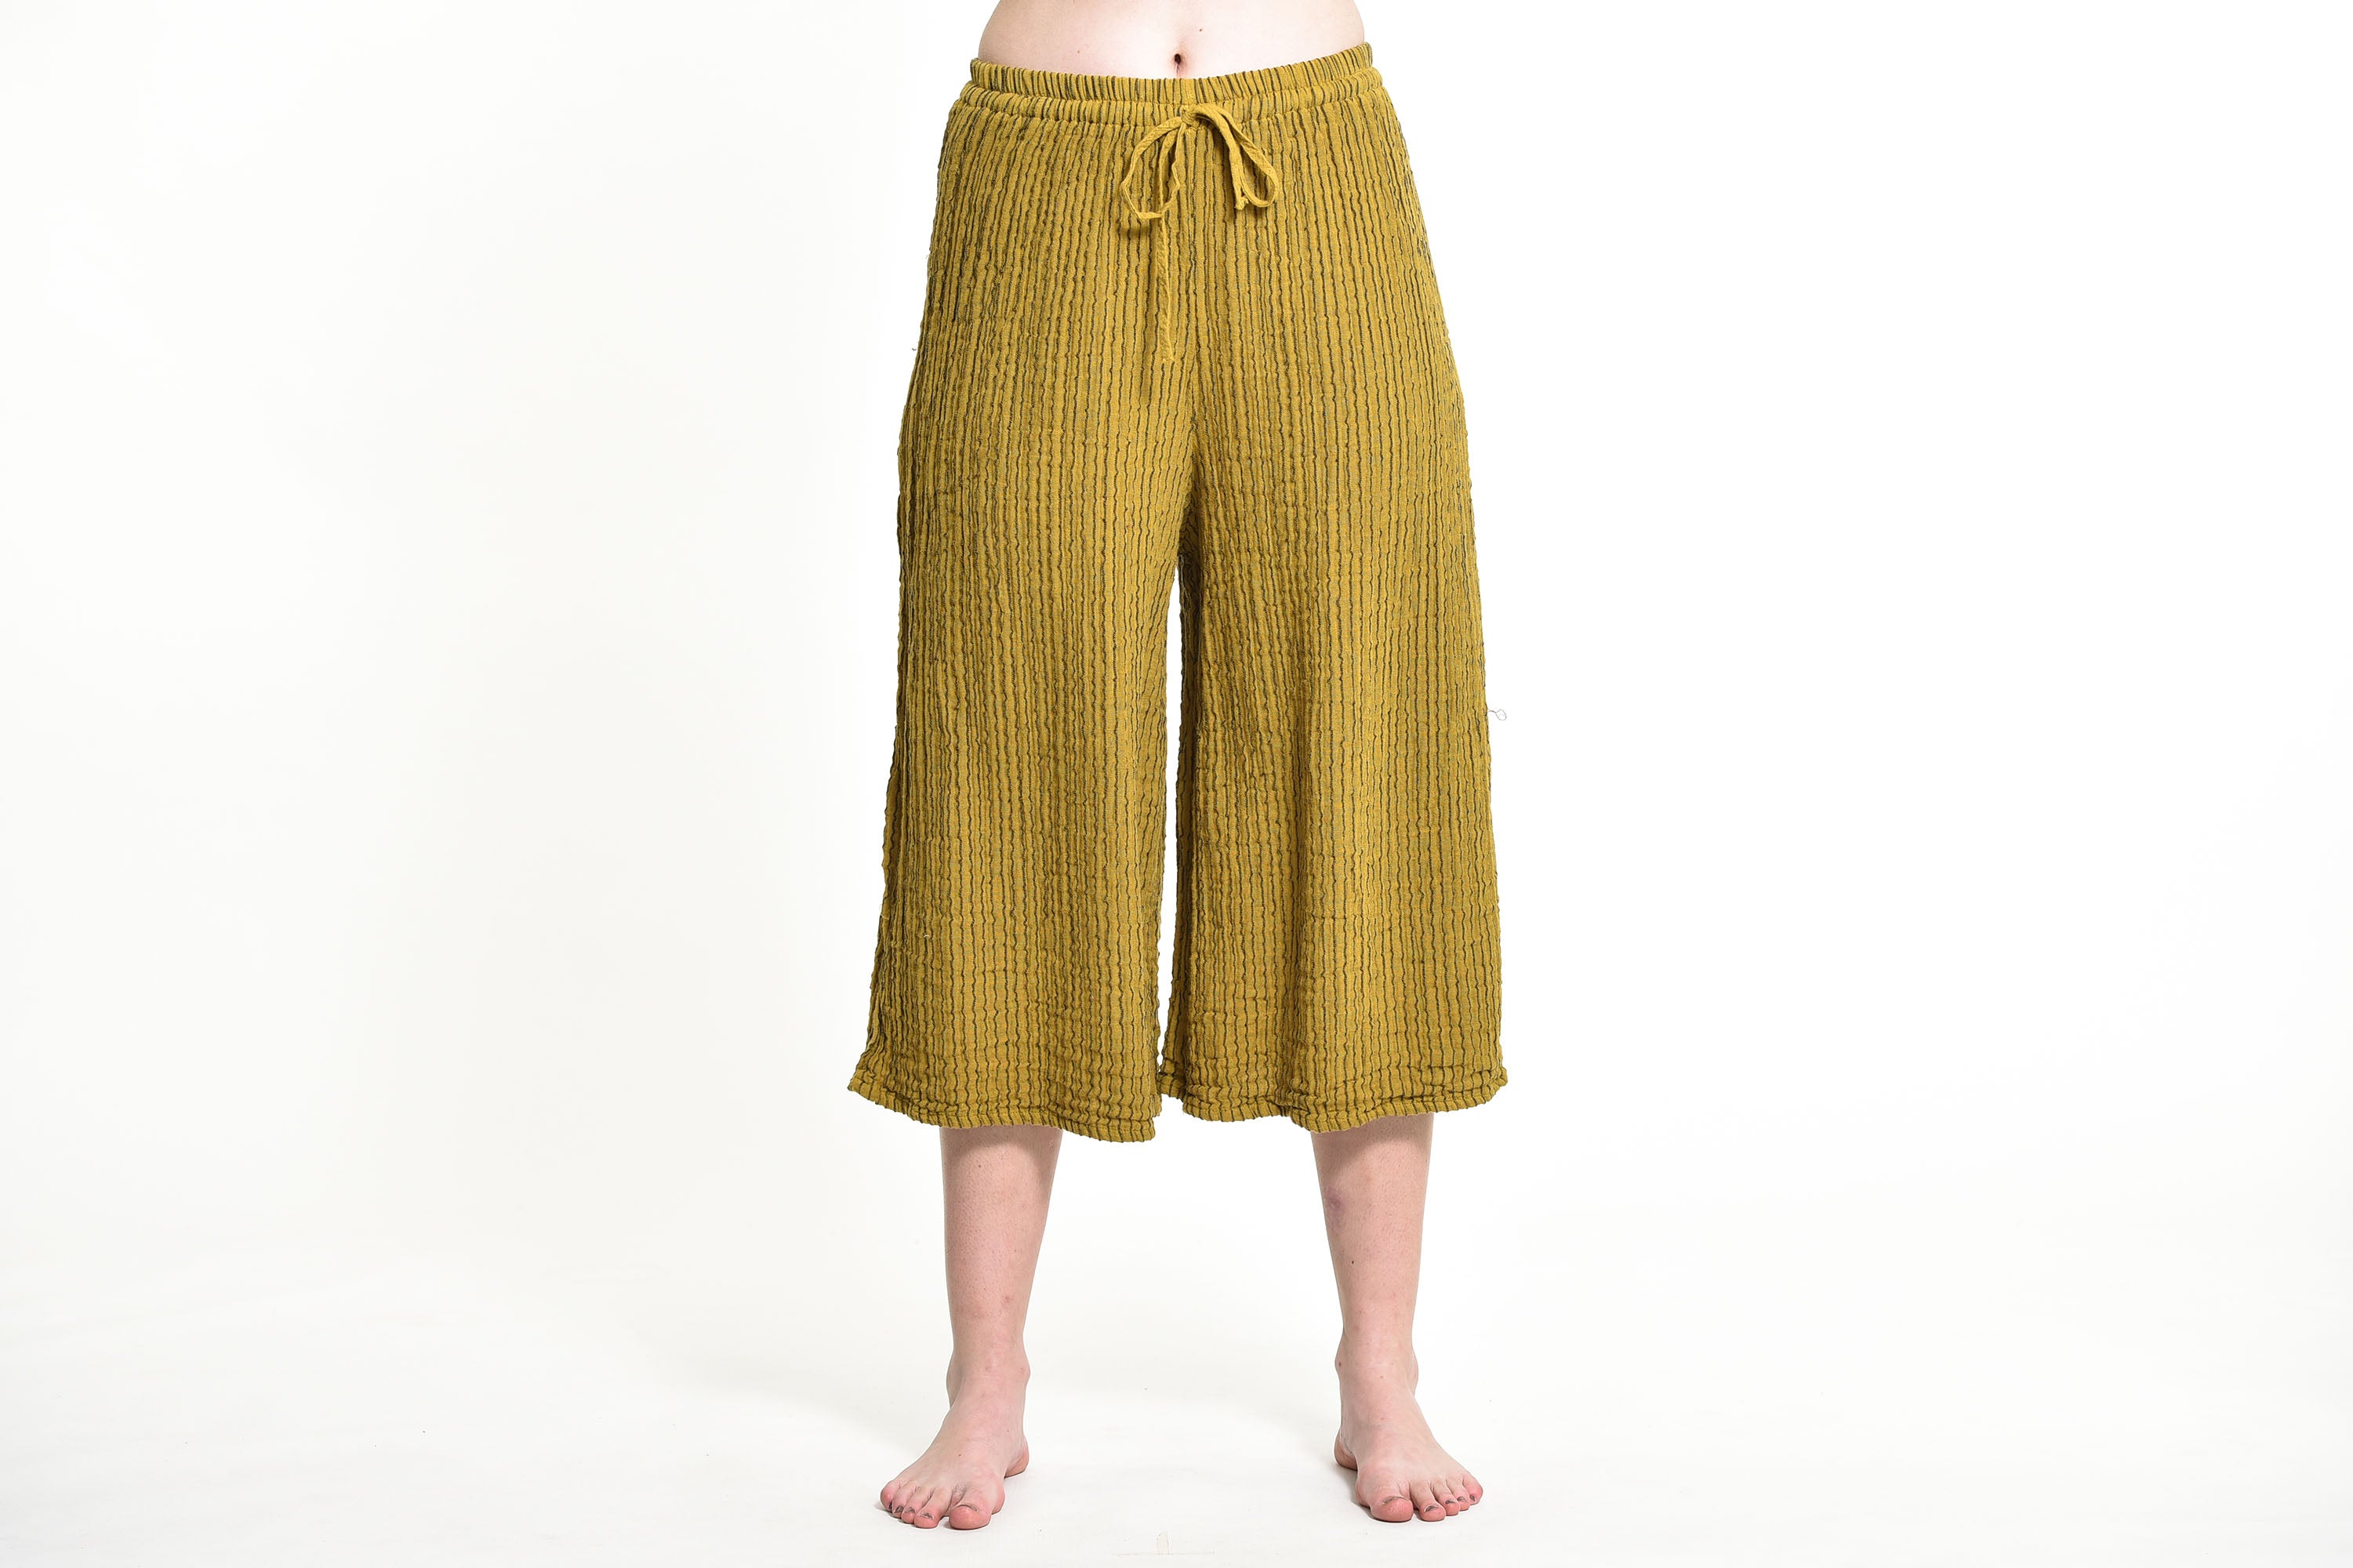 Women's Crinkled Cotton Cropped Pants in Mustard Yellow – Harem Pants